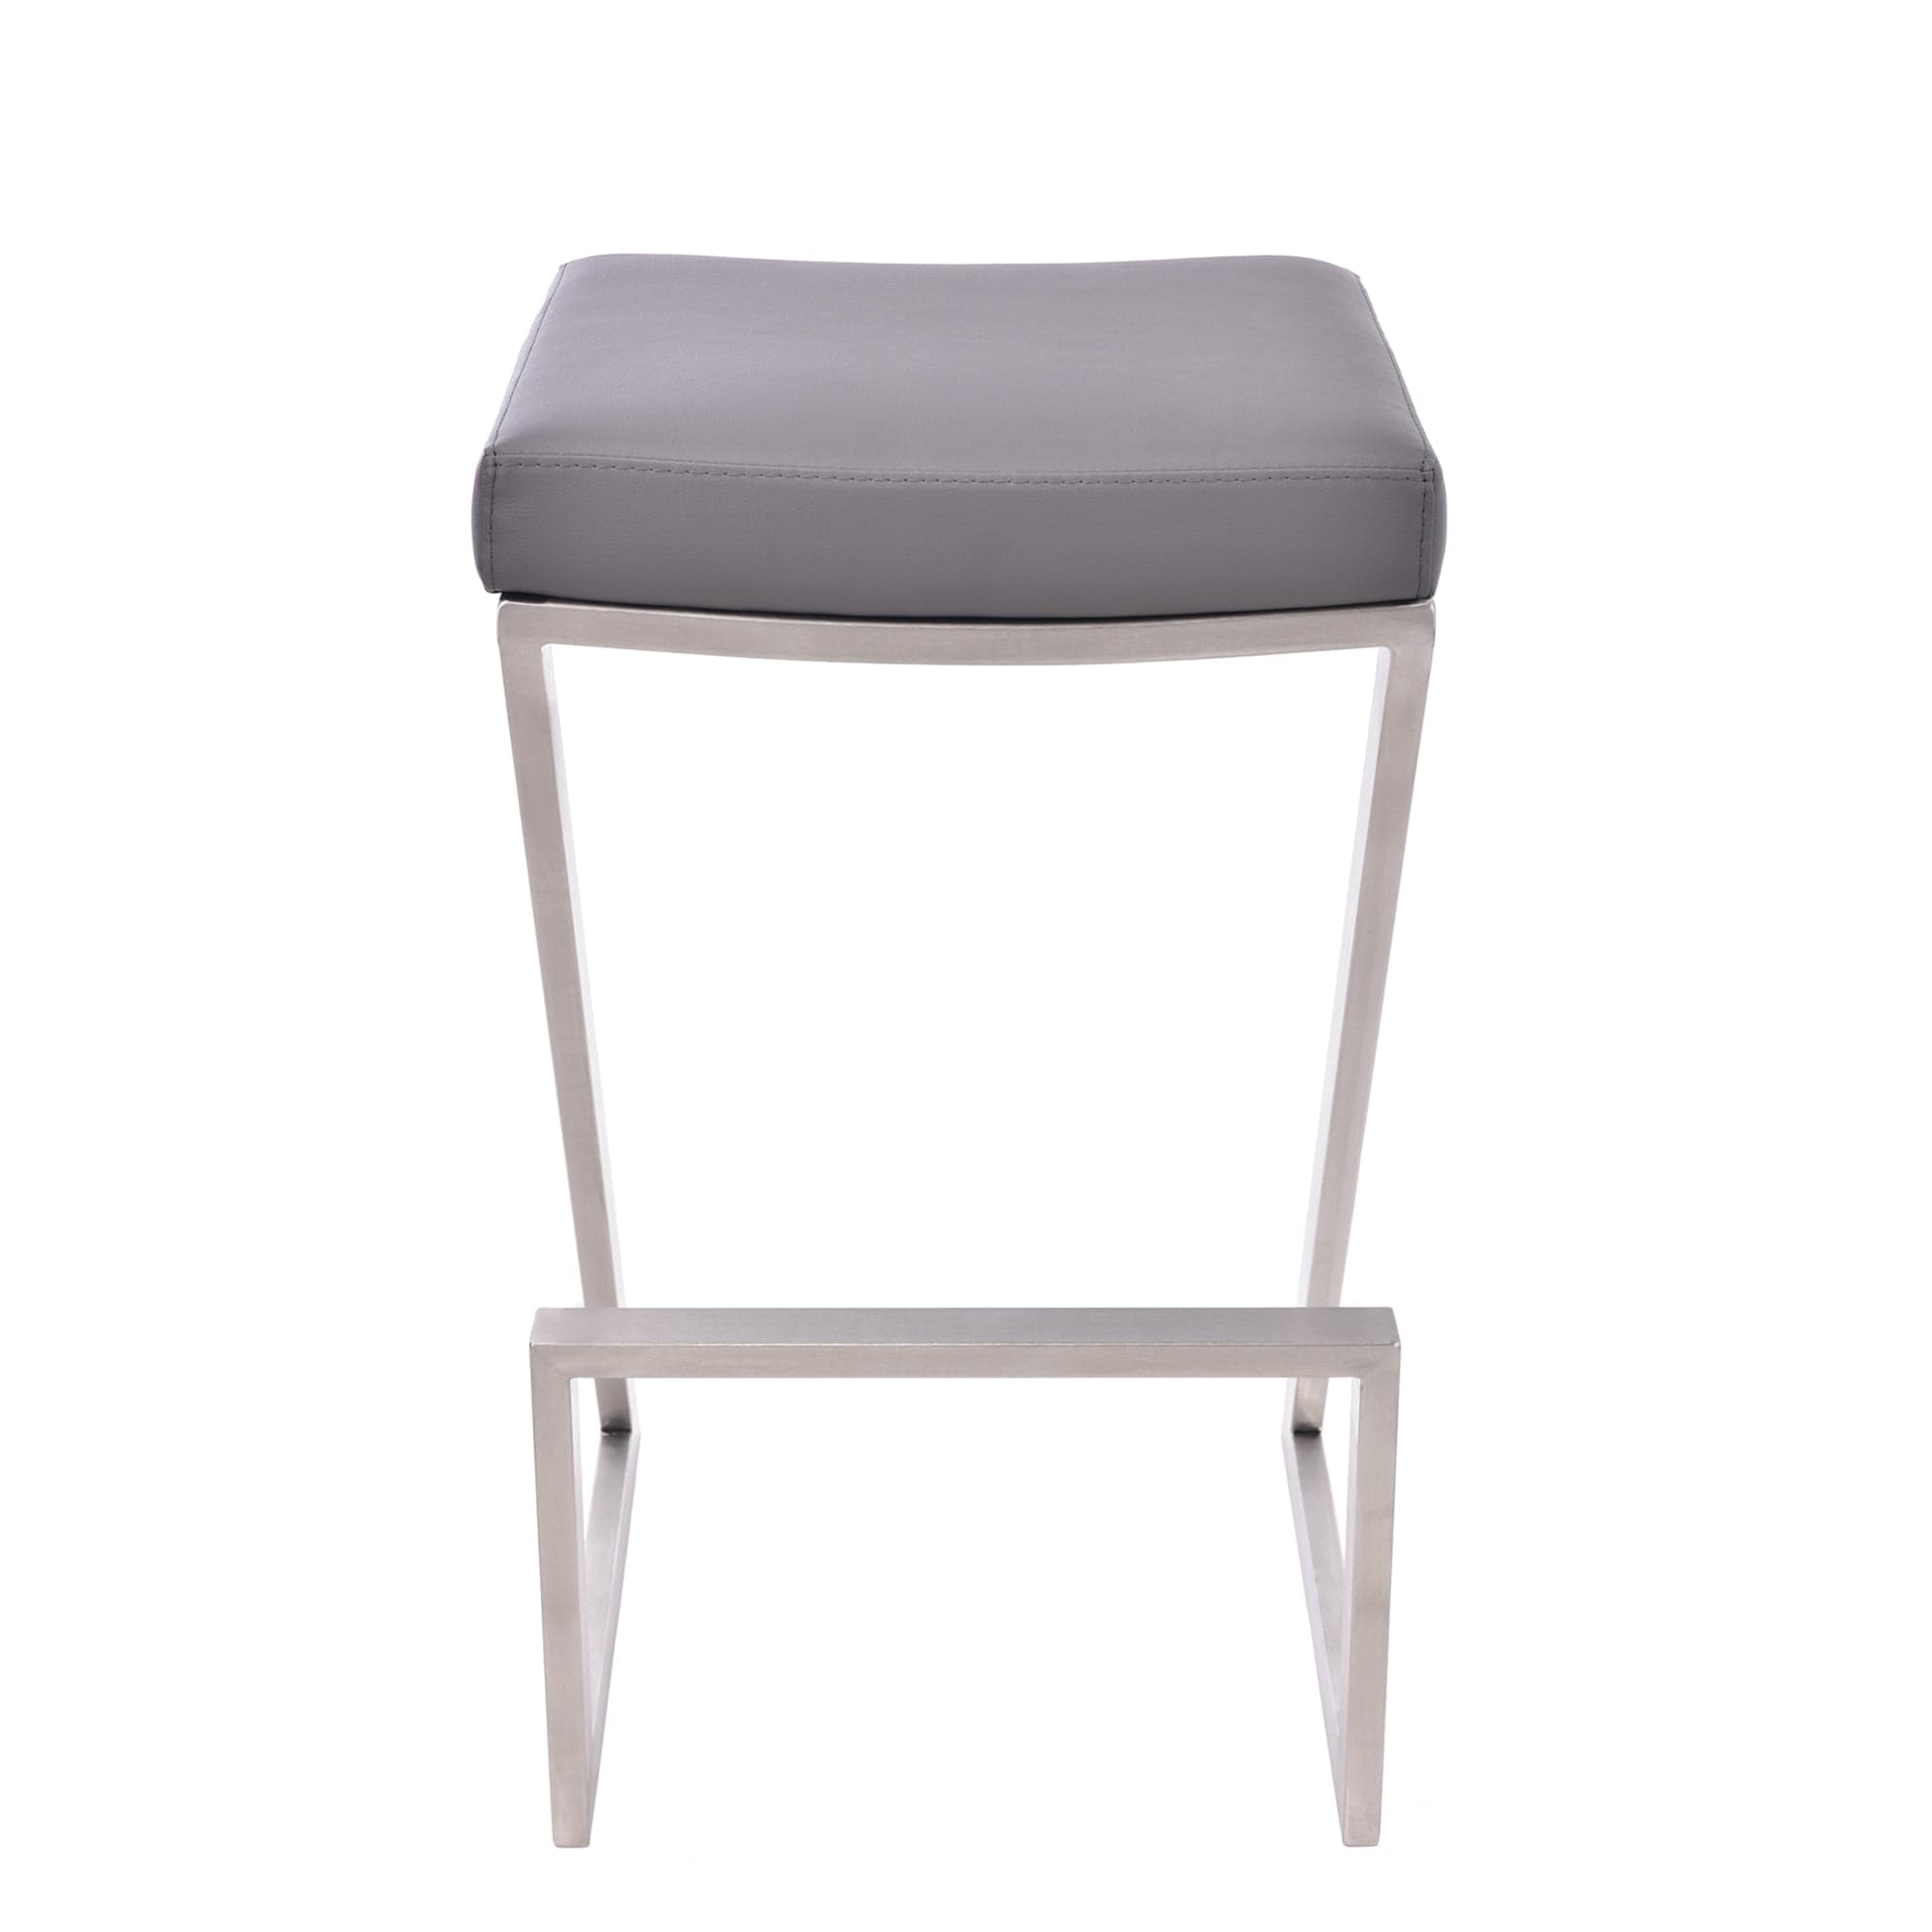 Armen Living Barstool Grey Faux Leather Armen Living - Atlantis 30" Bar Height Backless Grey Faux Leather and Brushed Stainless Steel Bar Stool | LCAT30BAGR